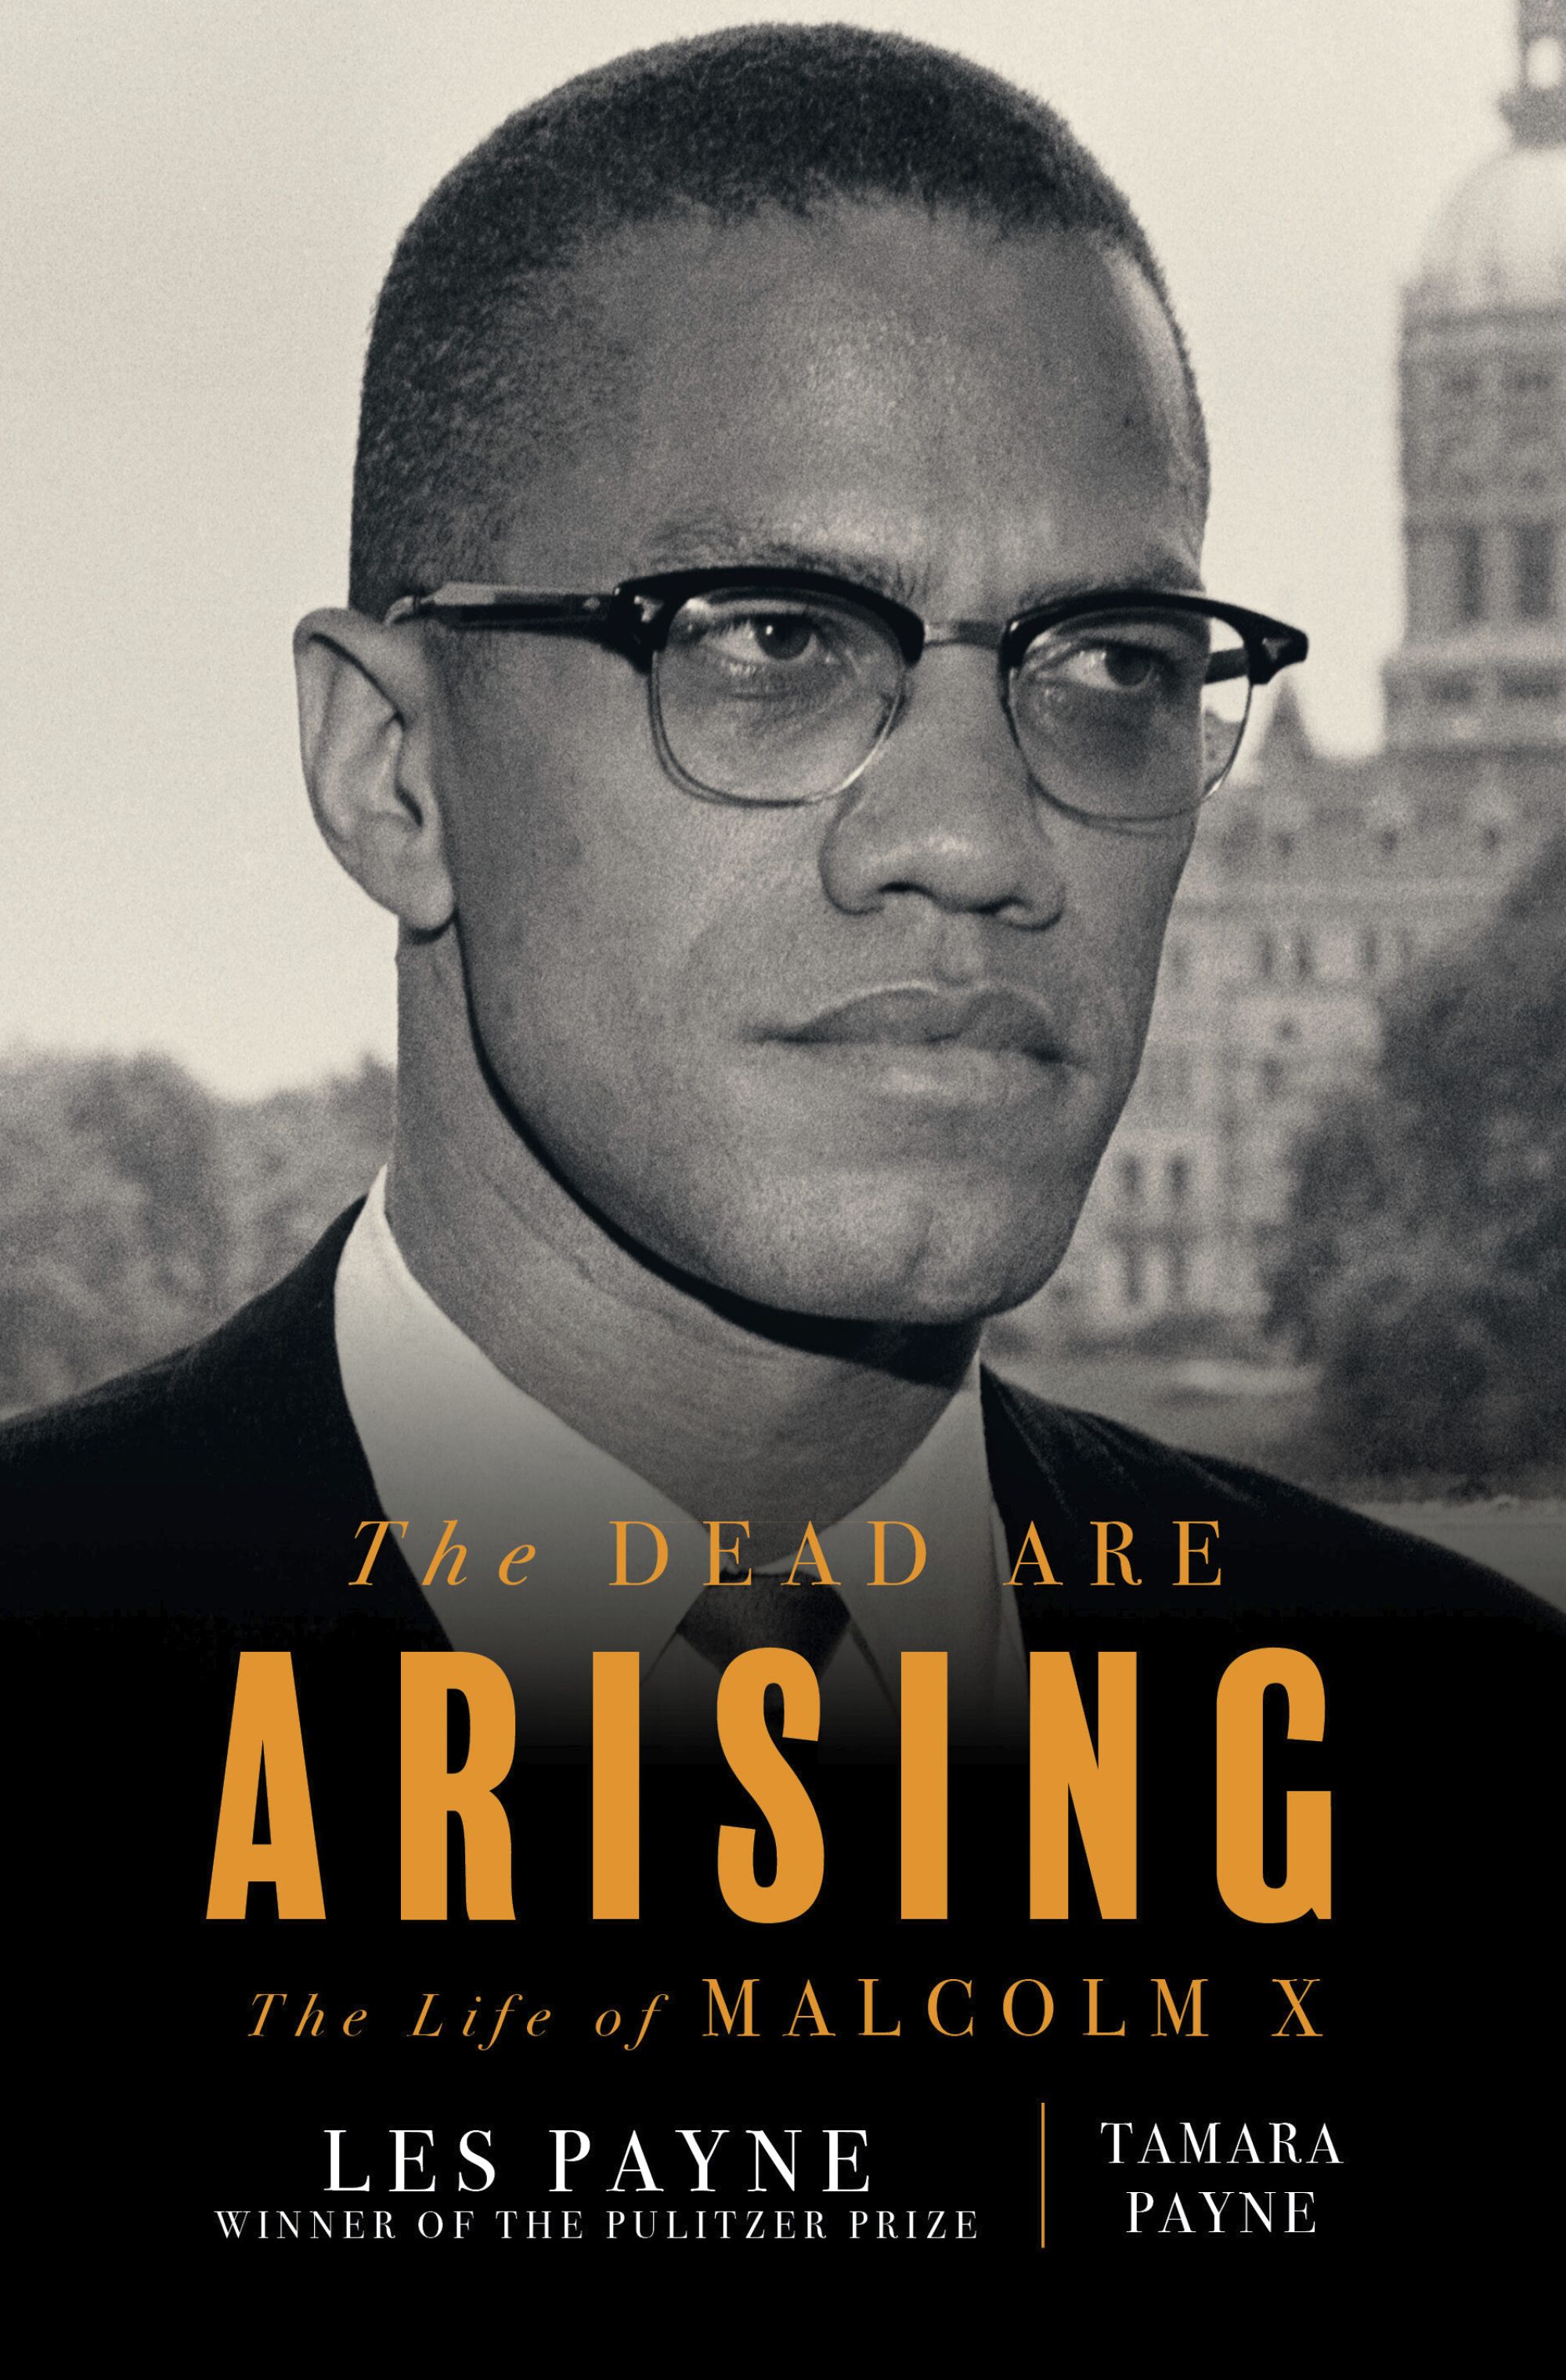 Malcolm X pictured on the cover of "The Dead Are Arising: The Life of Malcolm X," by Les Payne and Tamara Payne.